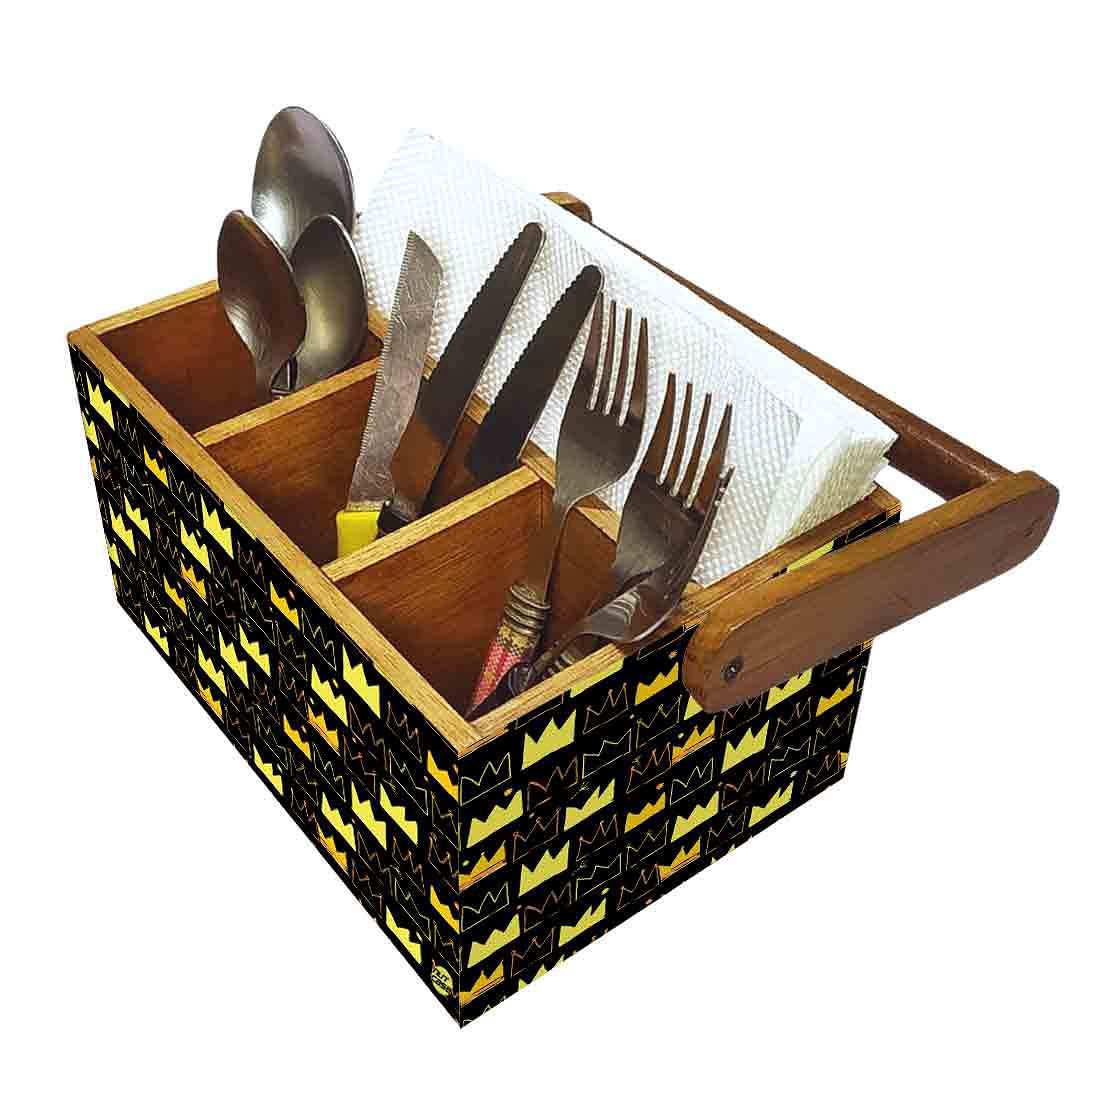 Cutlery Holder for Dining Table With Handle Wooden Organizer - Crown Nutcase